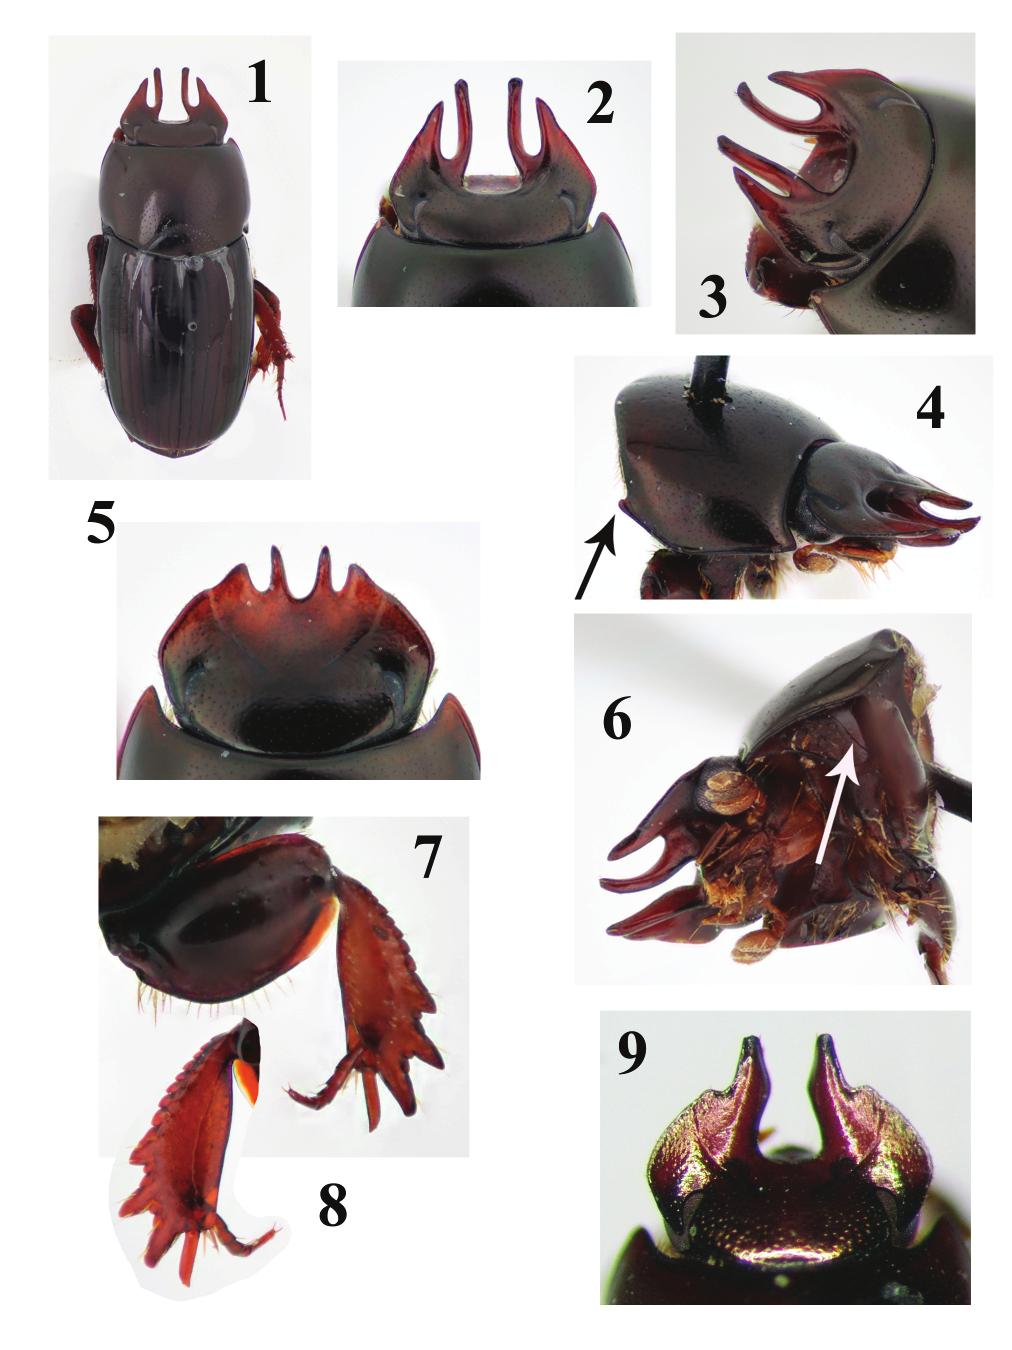 A NEW ANOMIOPUS FROM PERU INSECTA MUNDI 0402, January 2015 3 Figures 1 9. Two species of Anomiopus. 1) Anomiopus apuskispay, new species, holotype male, habitus, dorsal view.